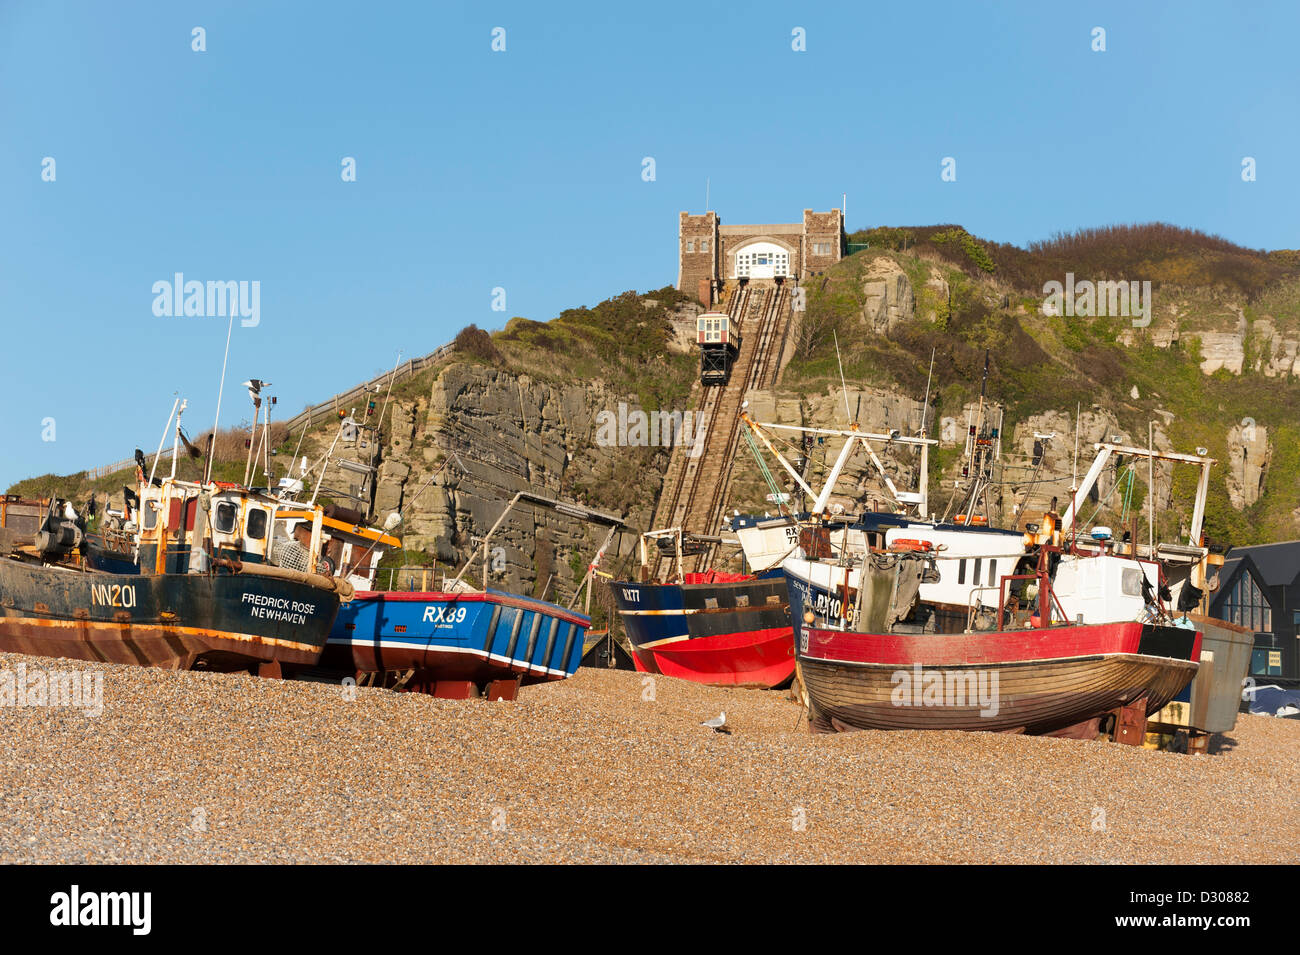 Fishings boats on The Stade in Hastings, East Sussex, England, UK - with the funicular railway behind Stock Photo